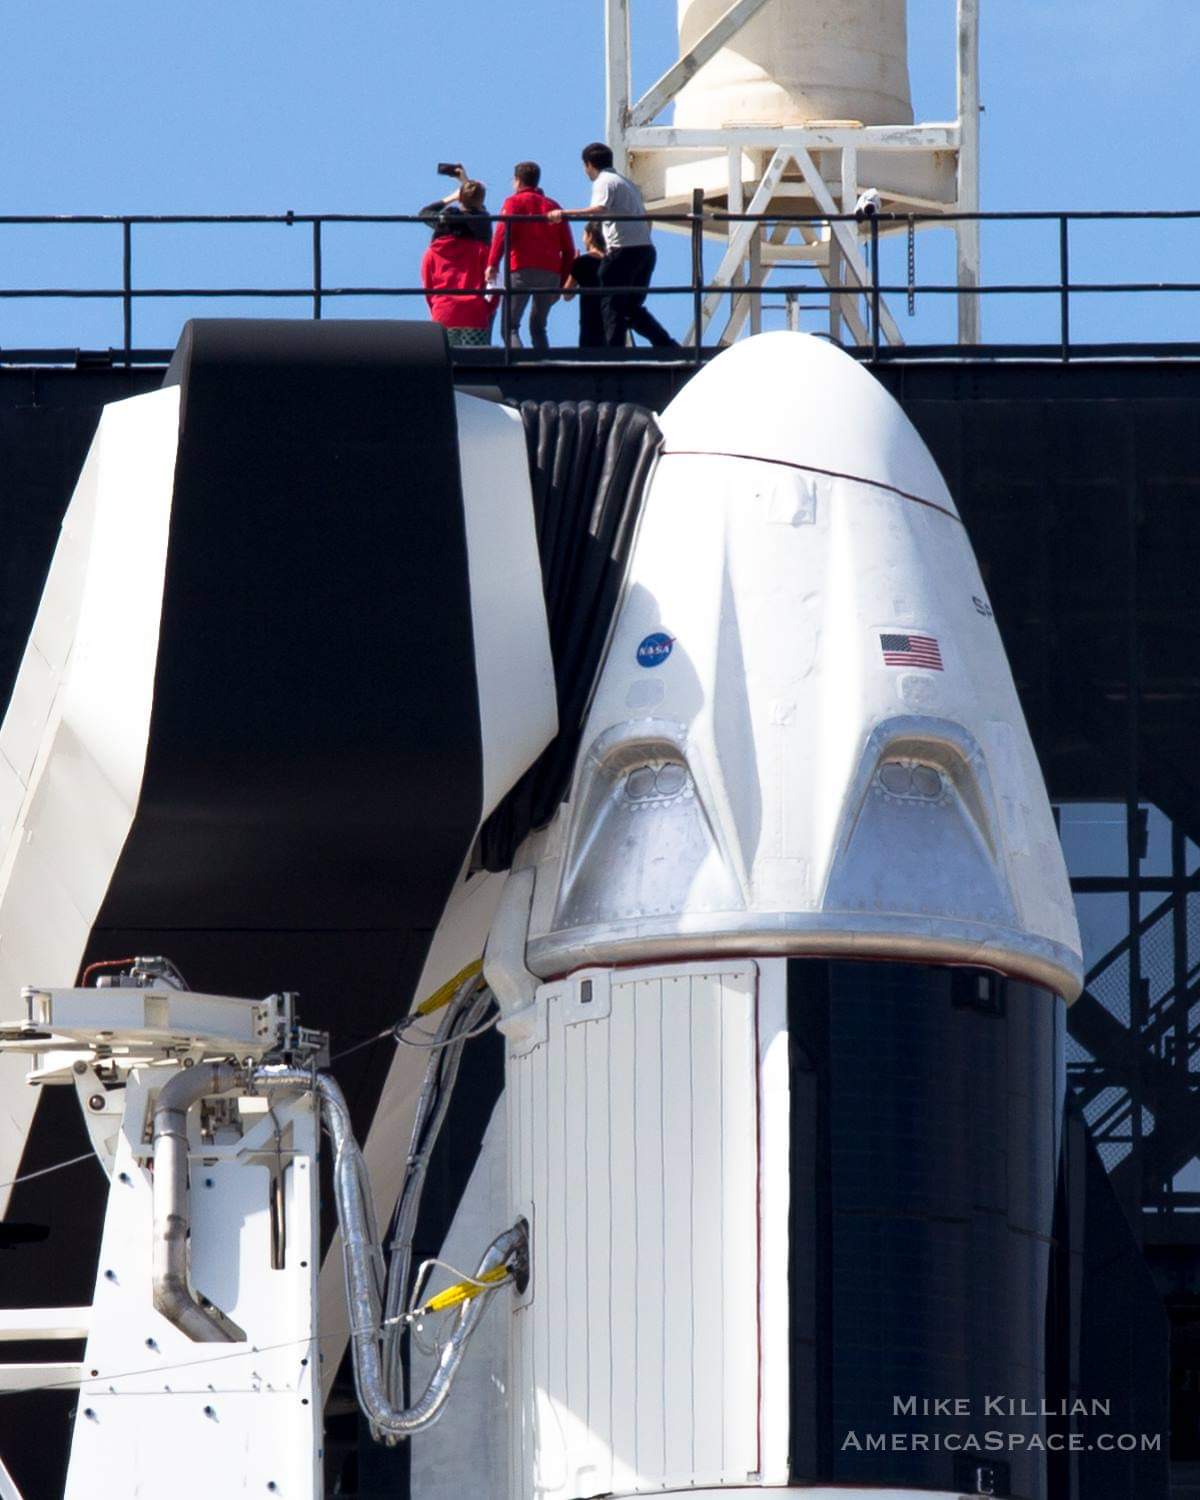 SpaceX Uncrewed Flight Today Will Test Abort System for Crew